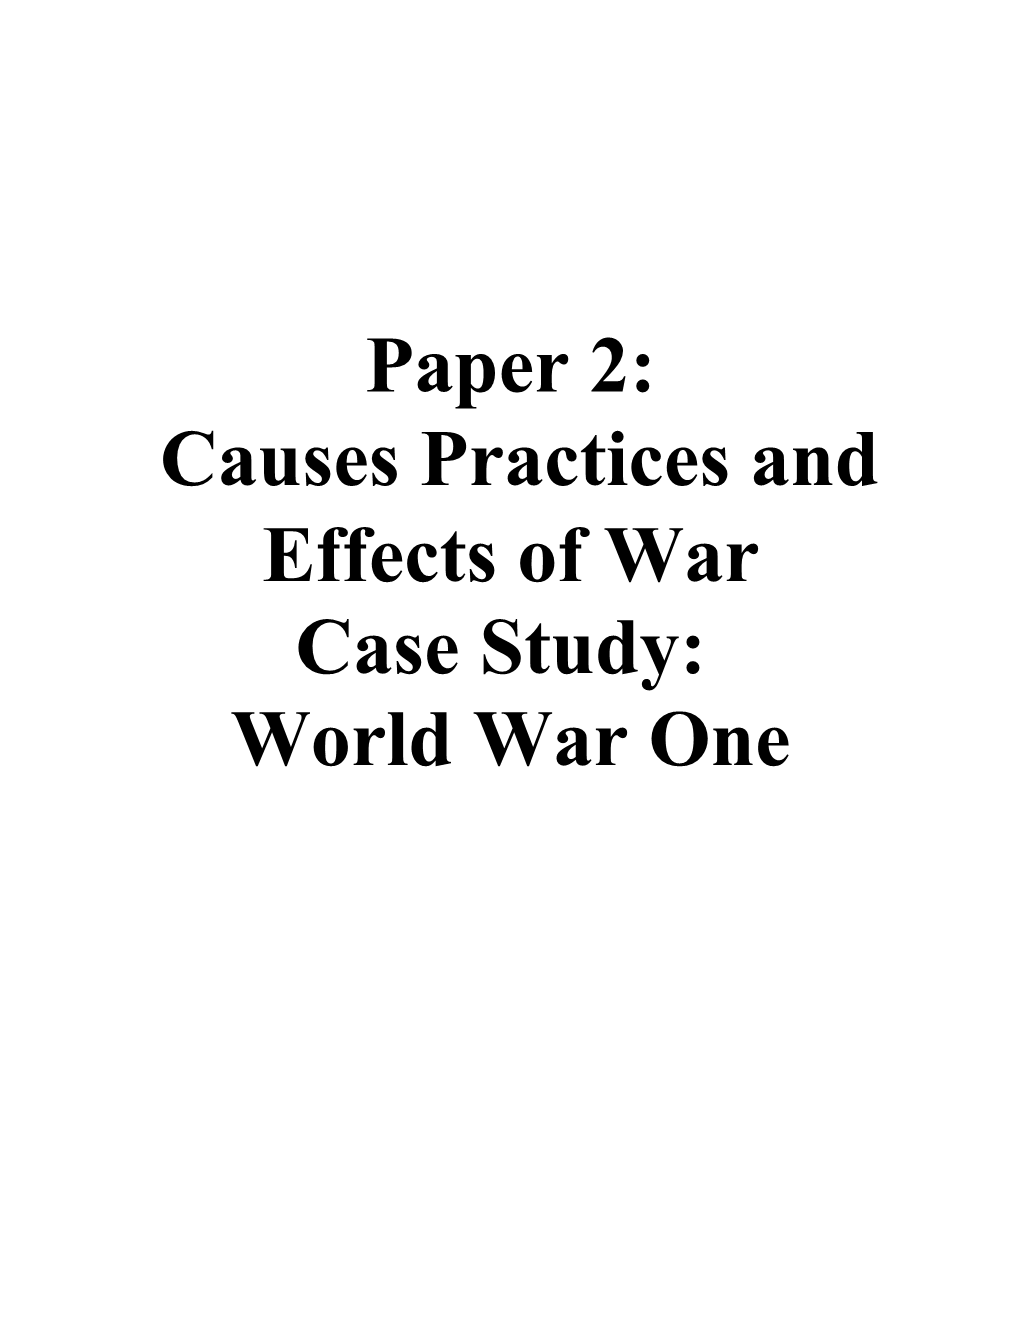 Causes Practices and Effects of War